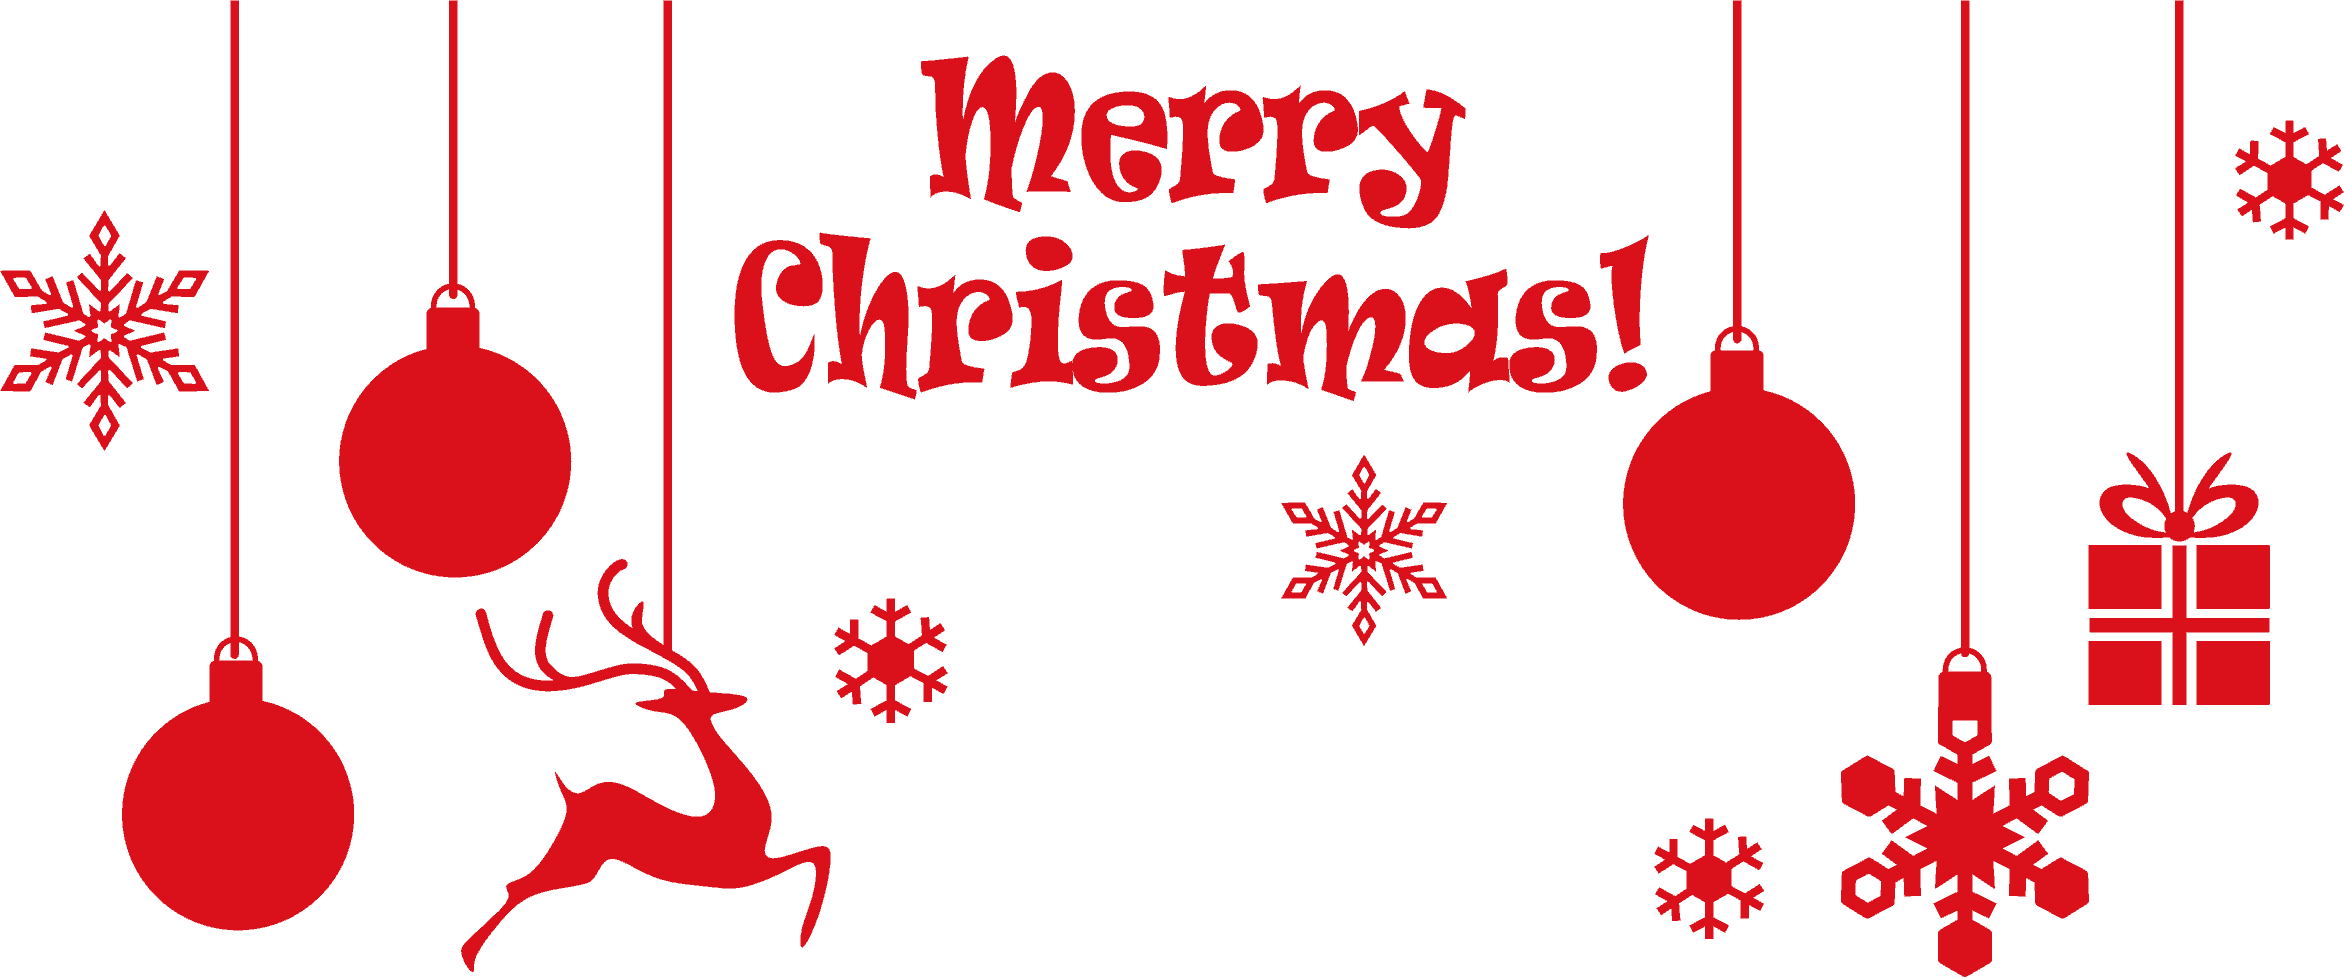 Merry Christmas Celebration PNG Pic Background